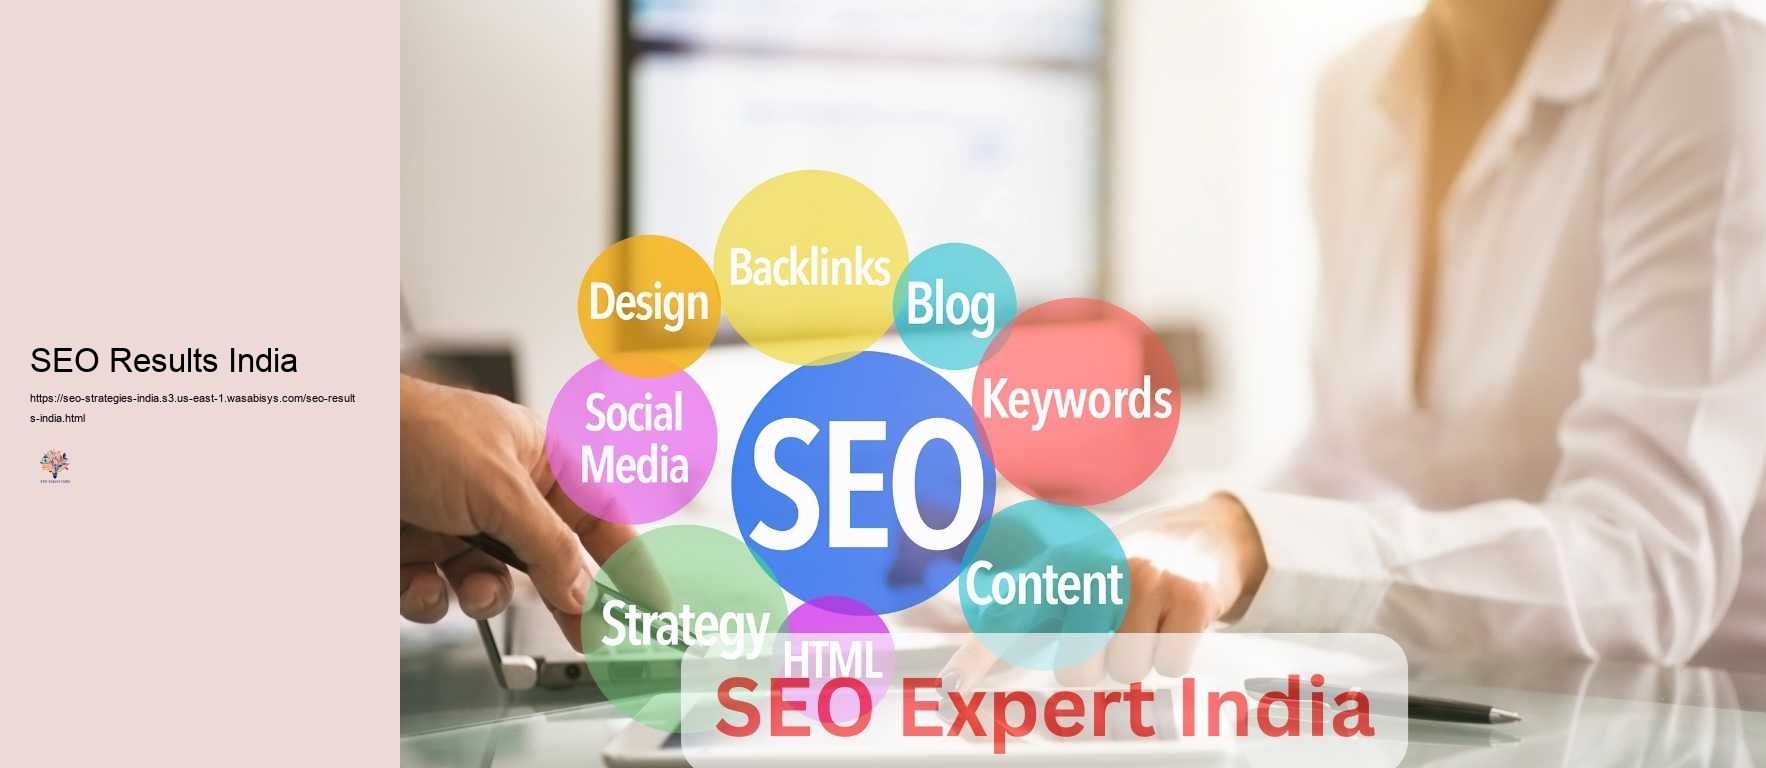 SEO Results India